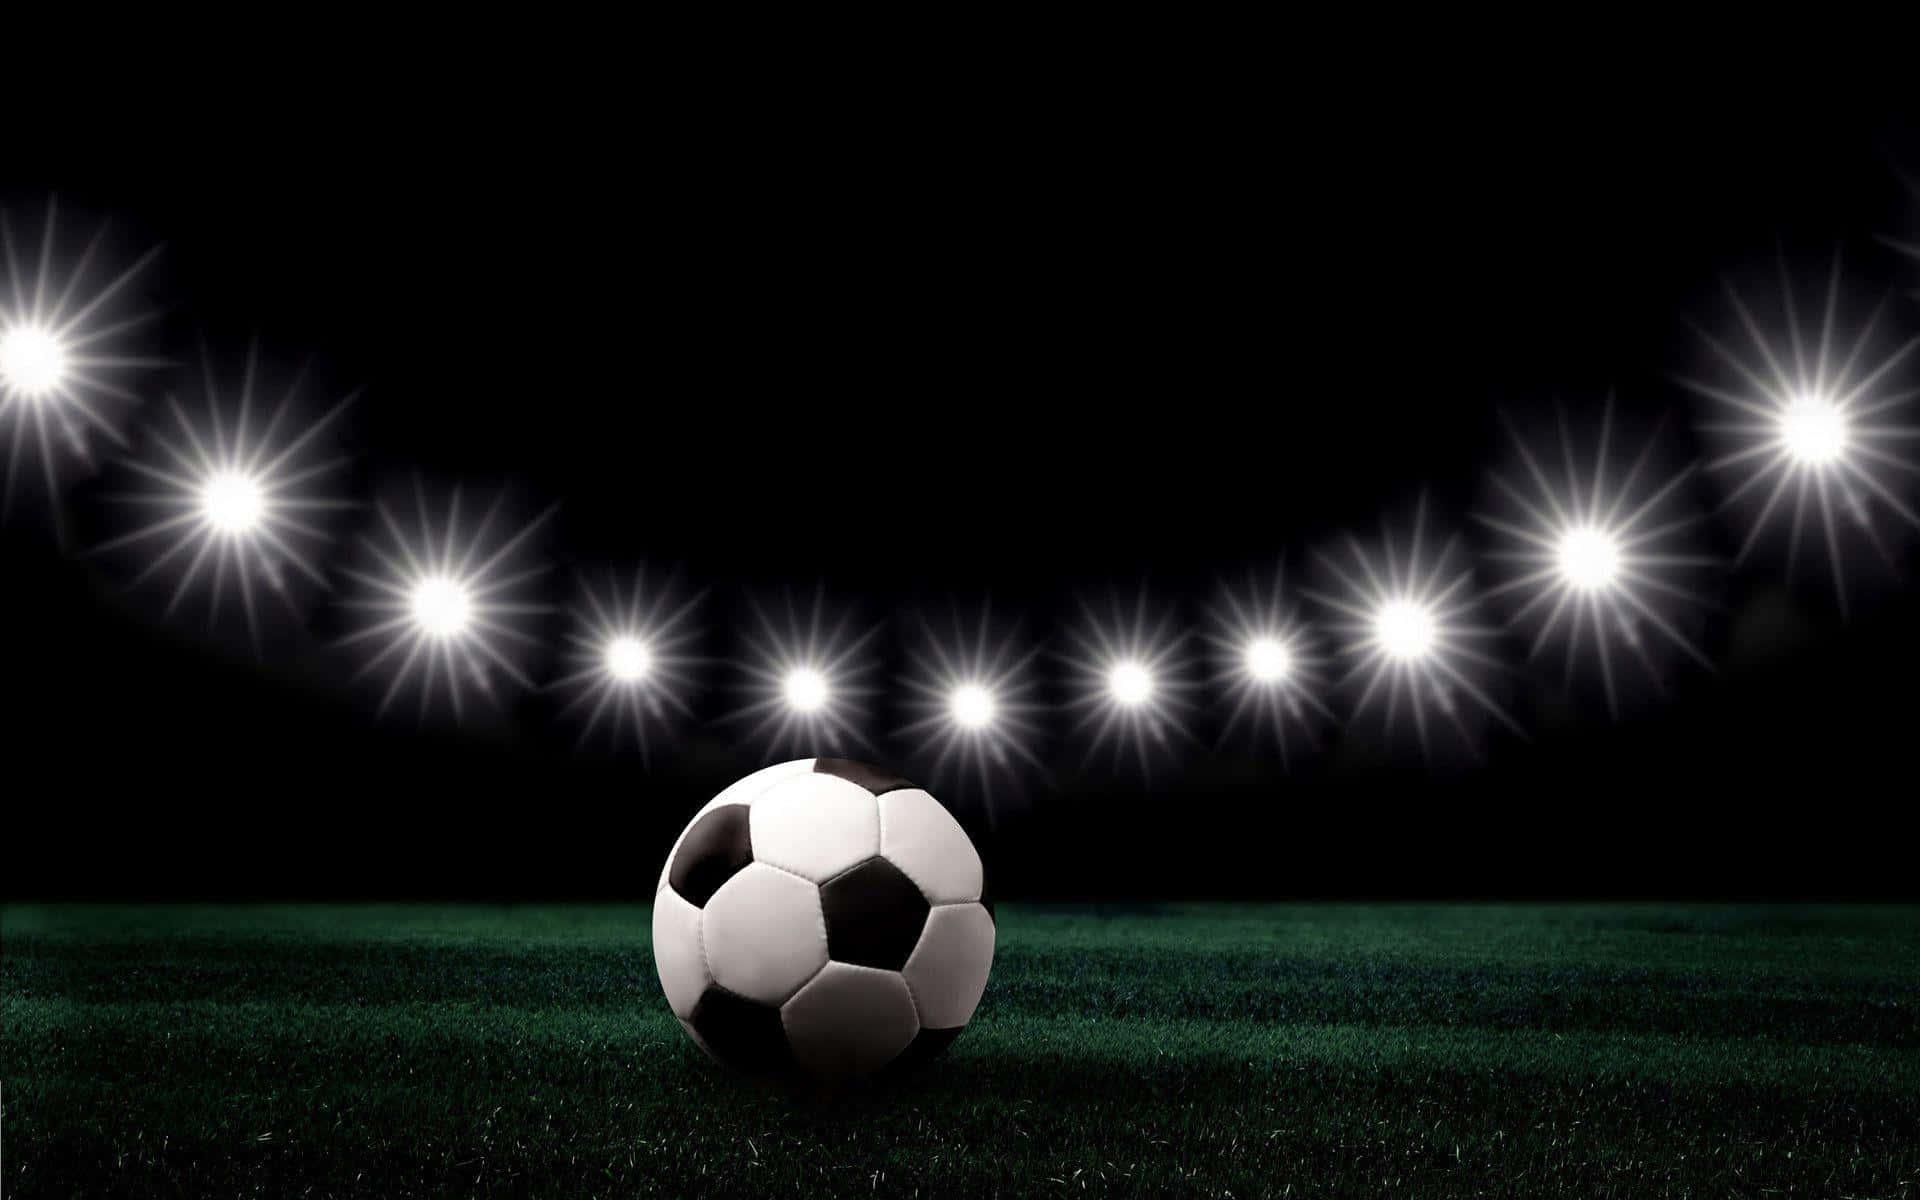 A Soccer Ball On A Field With Lights